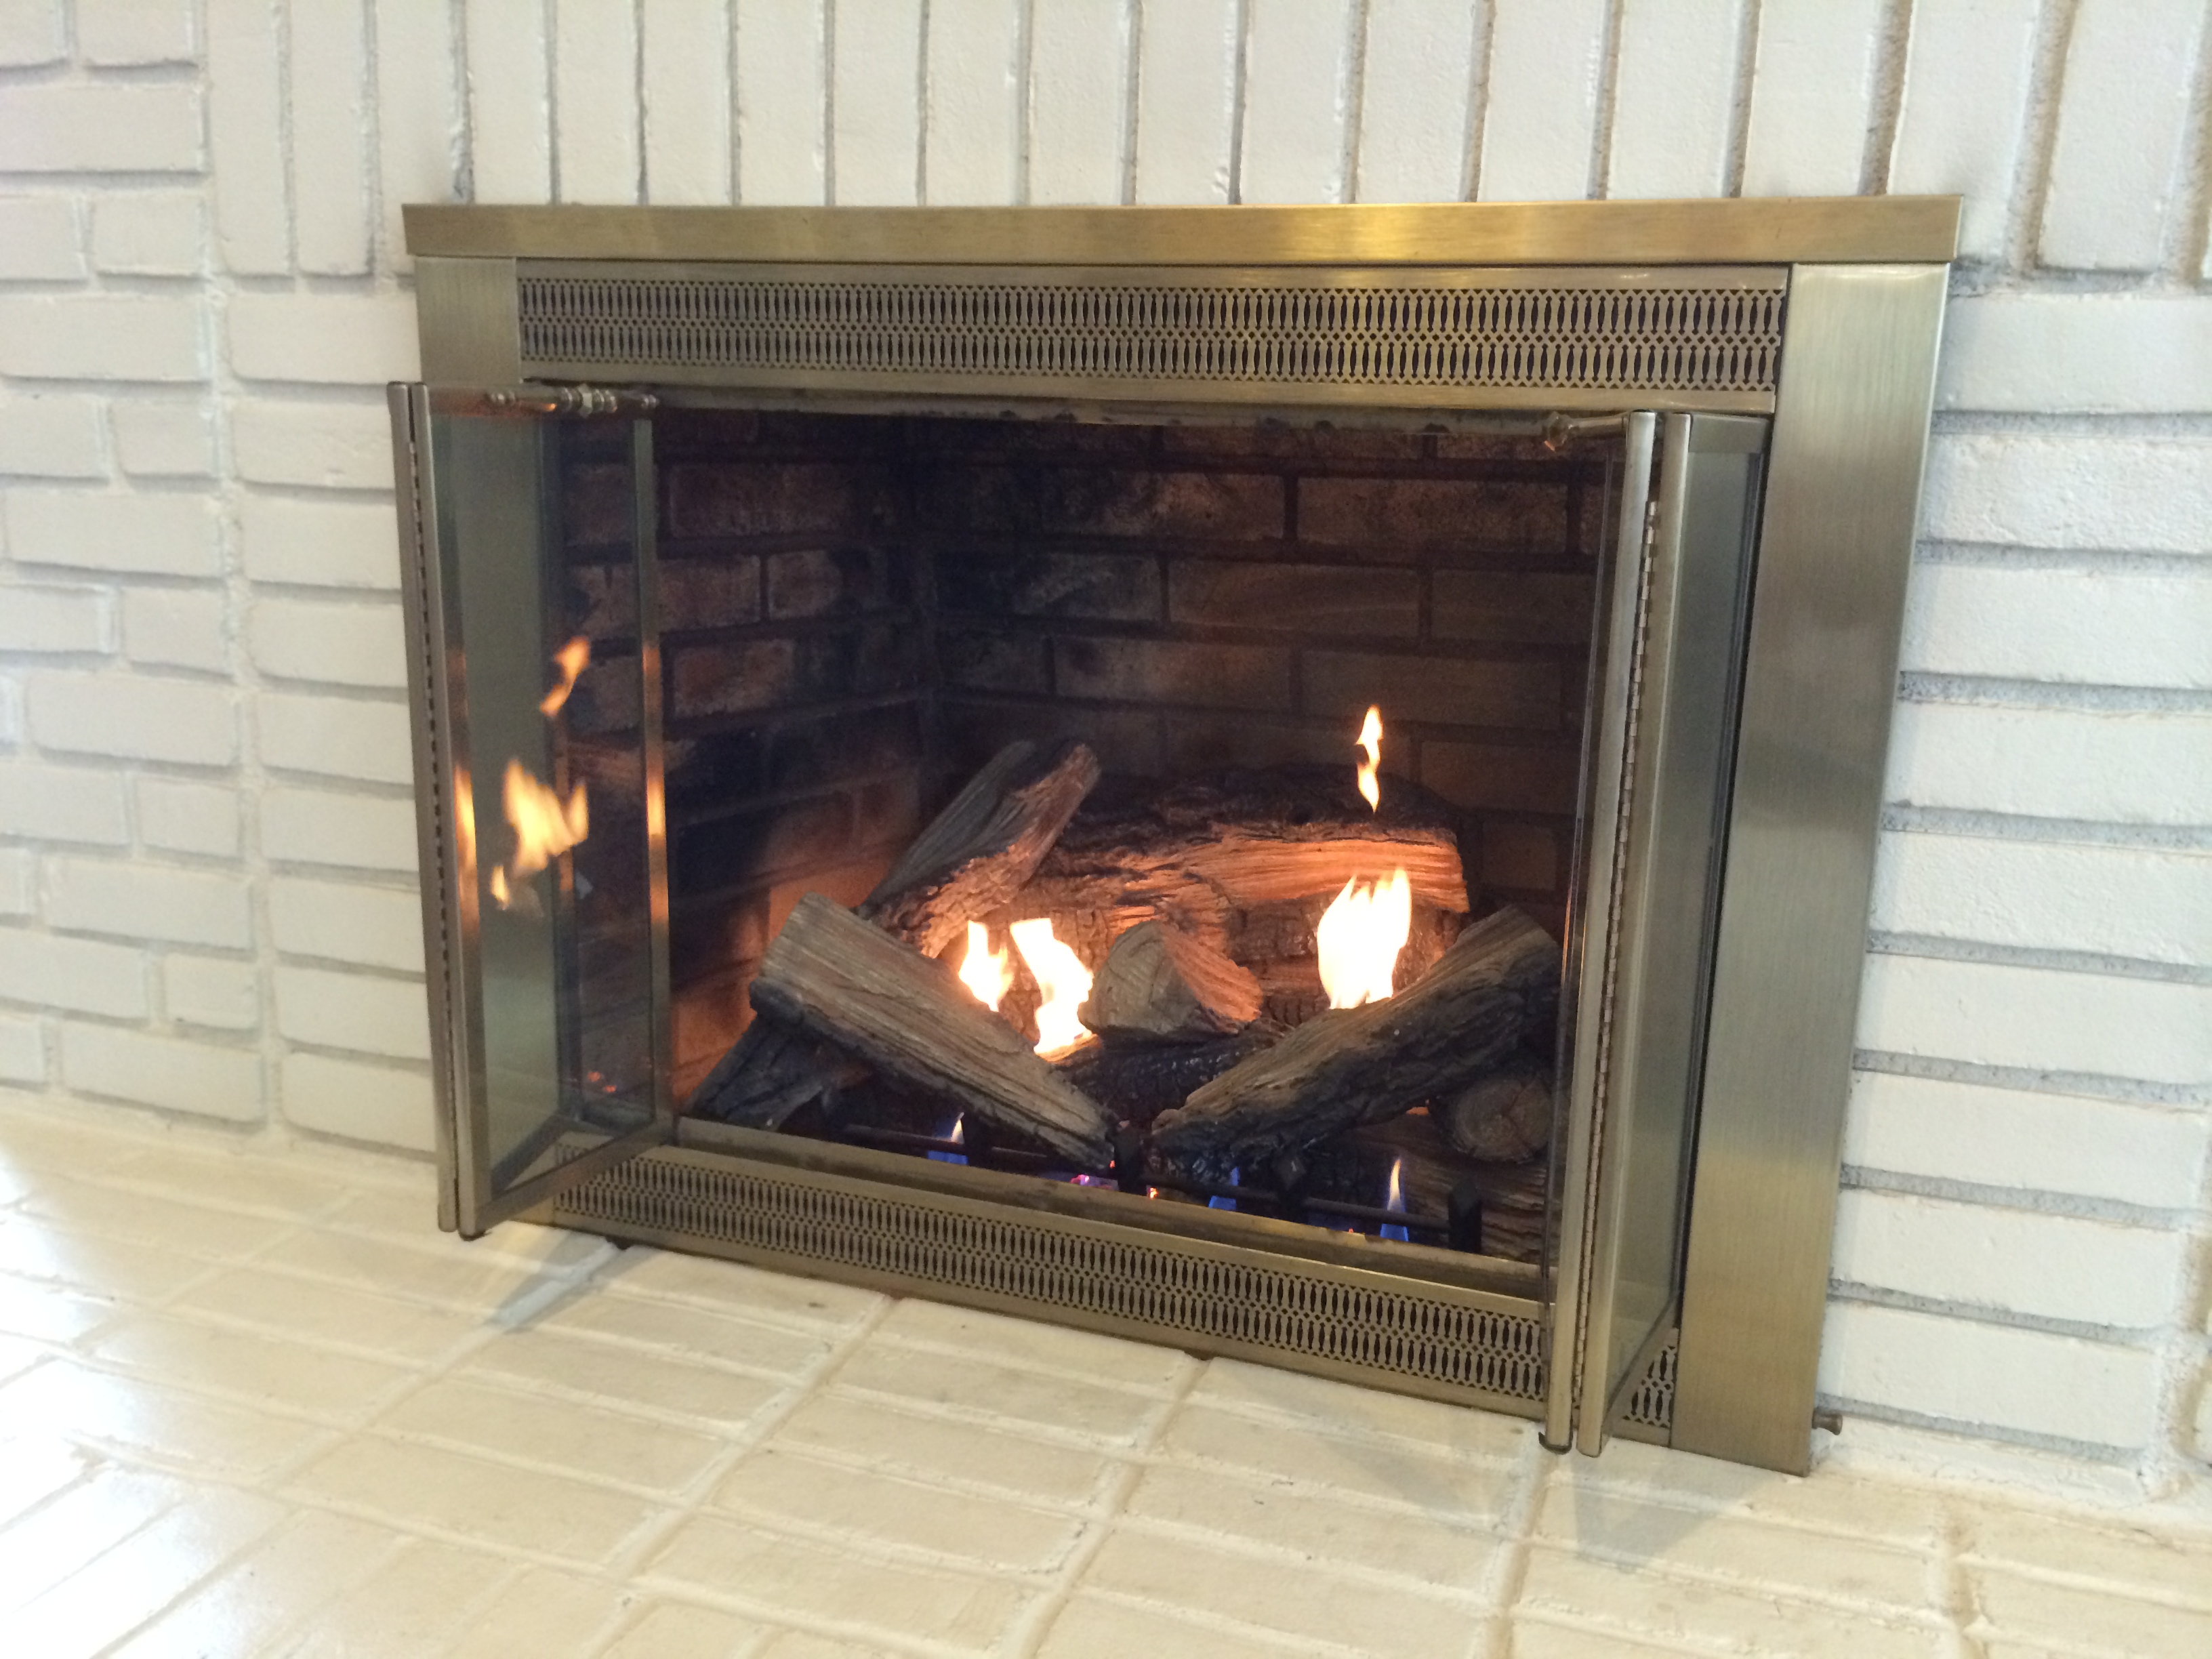 Ventless Fireplace Insert Takes the Chill off Winter